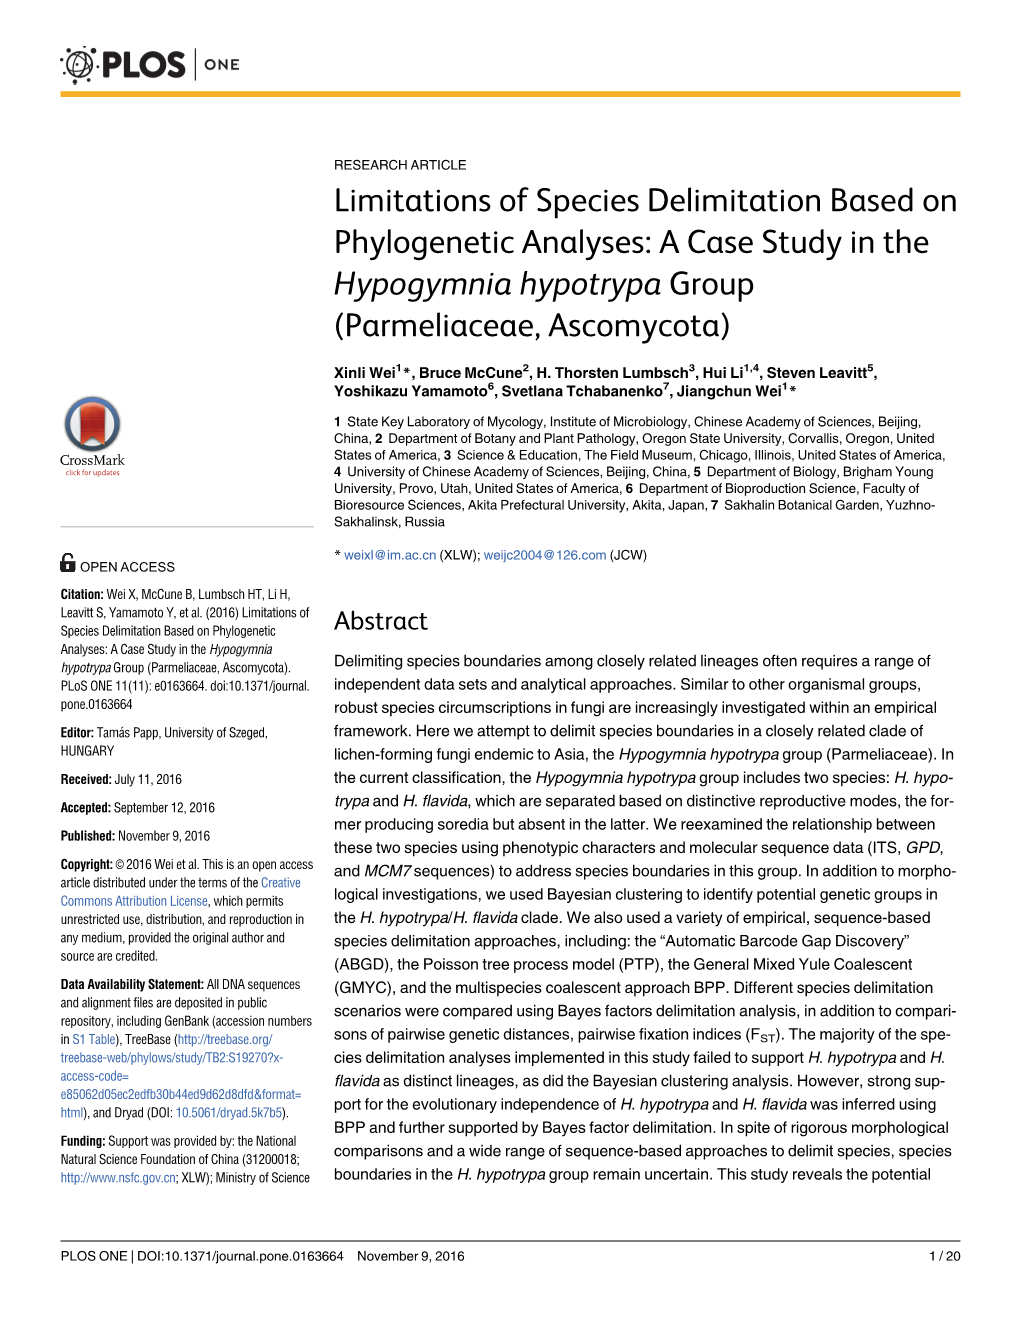 Limitations of Species Delimitation Based on Phylogenetic Analyses: a Case Study in the Hypogymnia Hypotrypa Group (Parmeliaceae, Ascomycota)